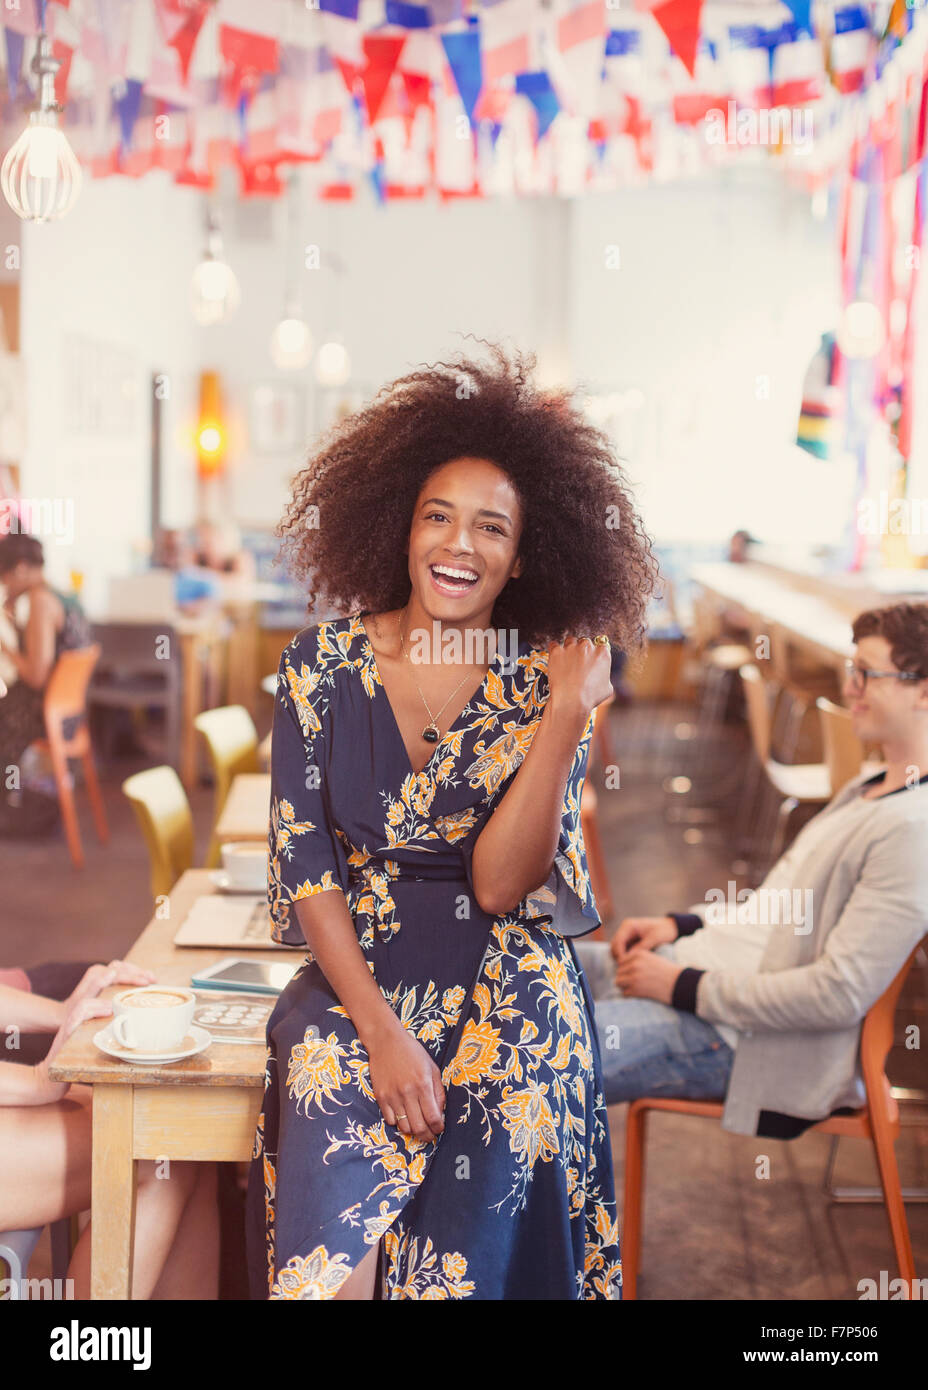 Portrait enthusiastic woman with afro in cafe Stock Photo